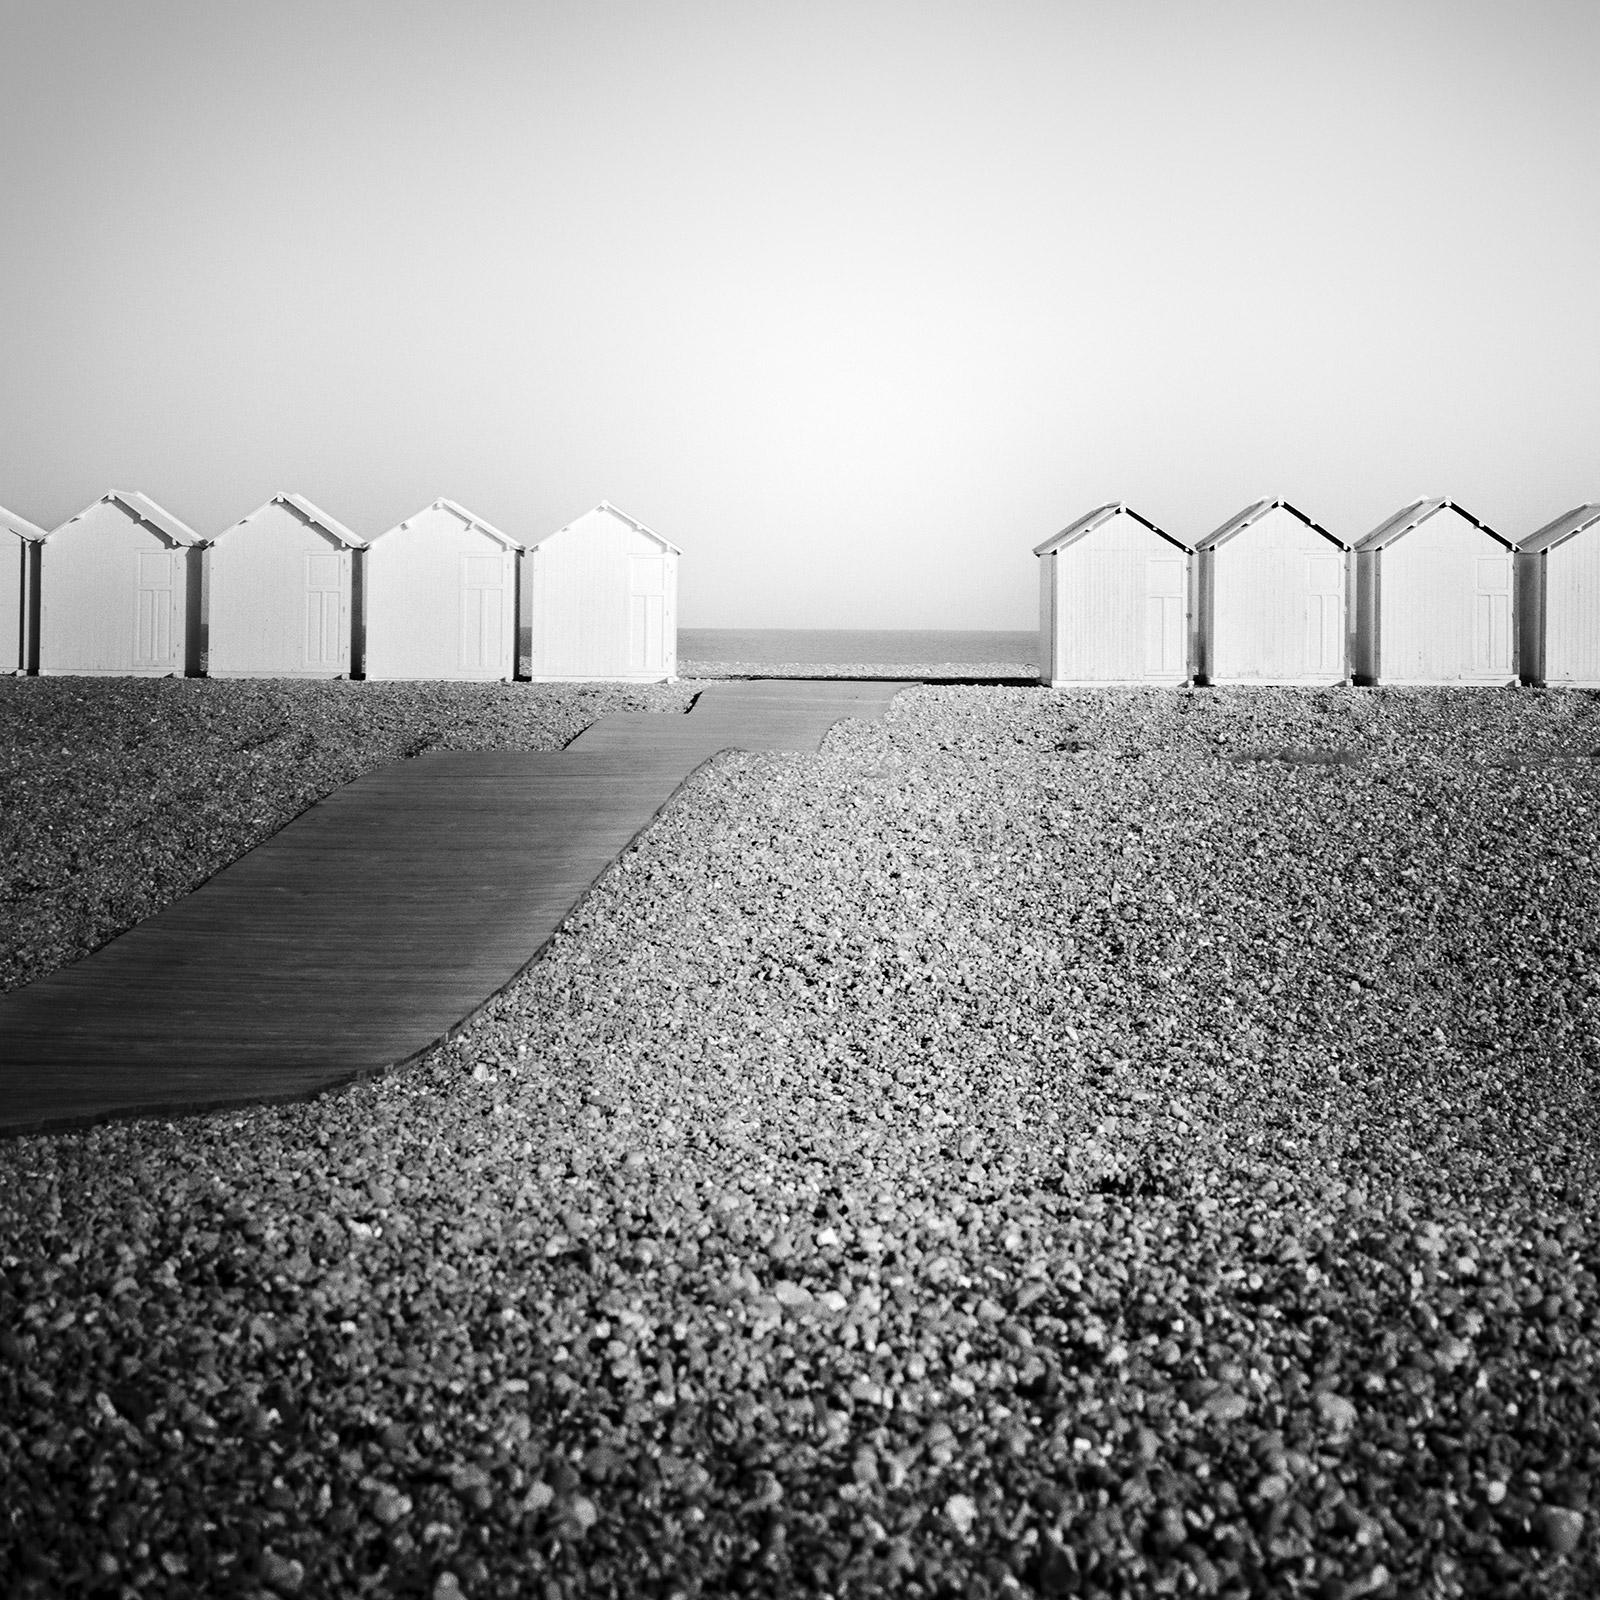 Gerald Berghammer Black and White Photograph - Wood Huts, Promenade, Rocky Beach, France, black and white landscape photography